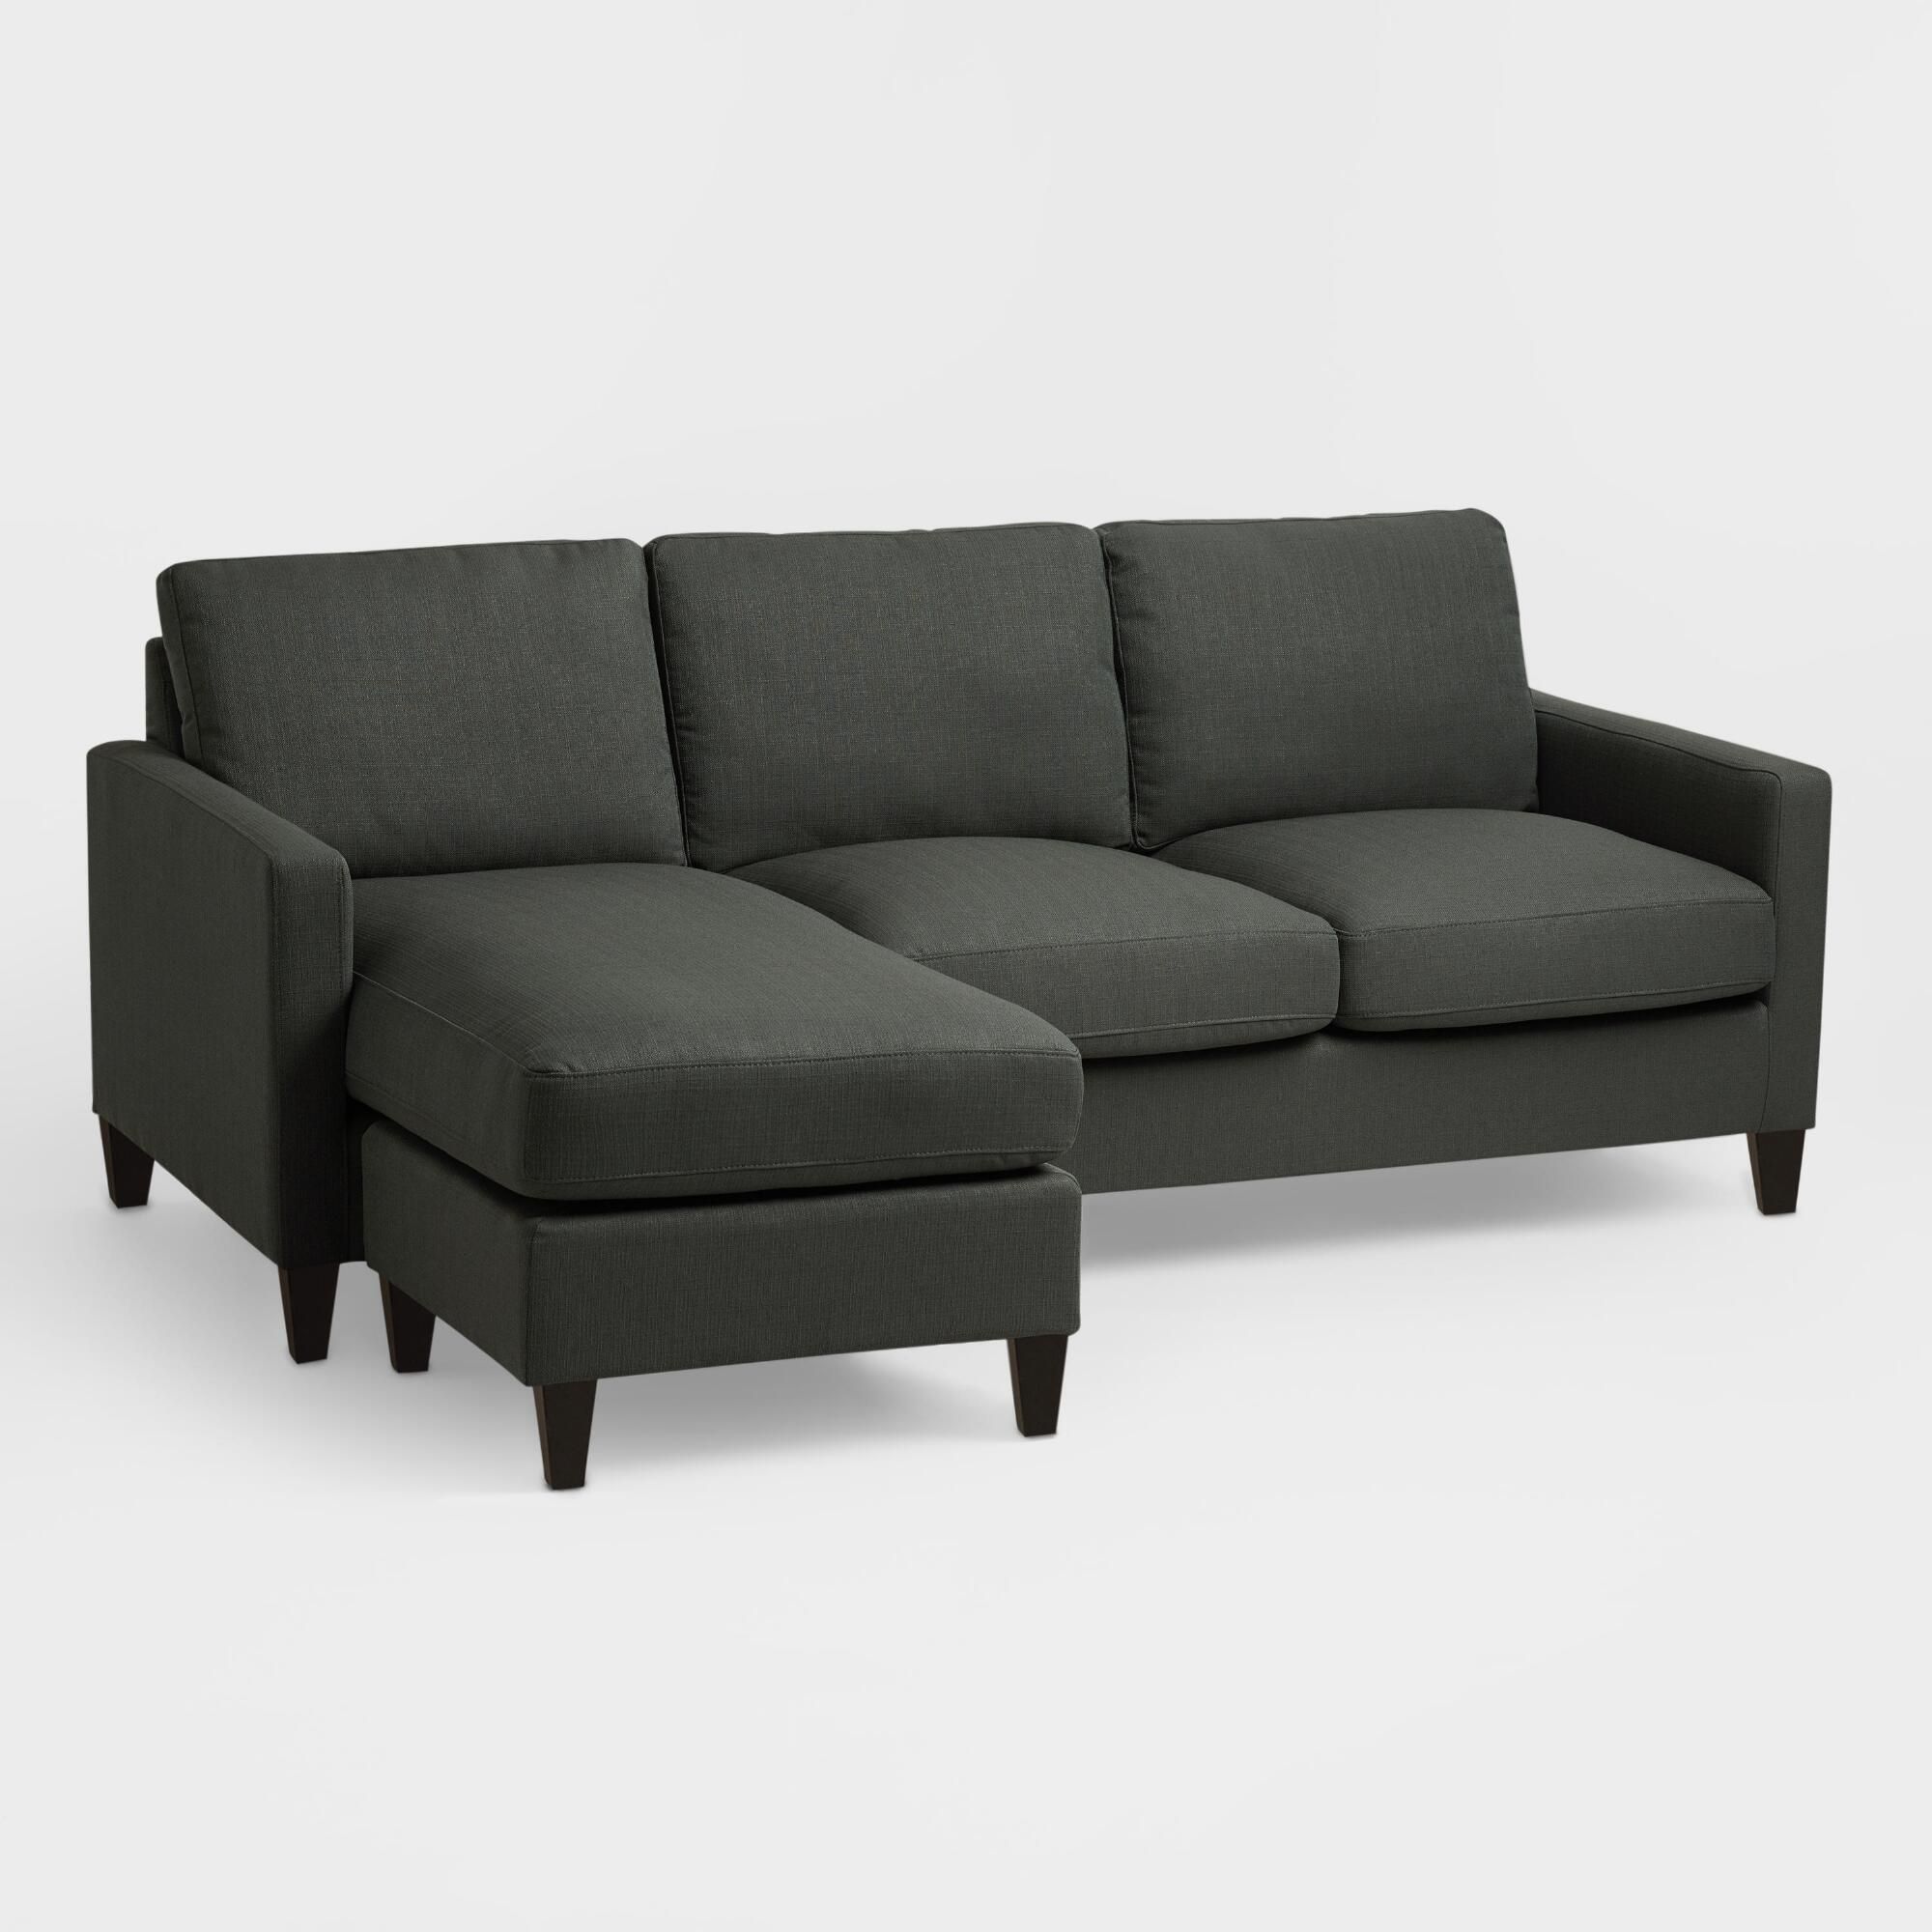 Furniture: Contemporary Sectional Sofas | Sectional Sleeper Sofa With Regard To Red Sectional Sleeper Sofas (View 15 of 22)